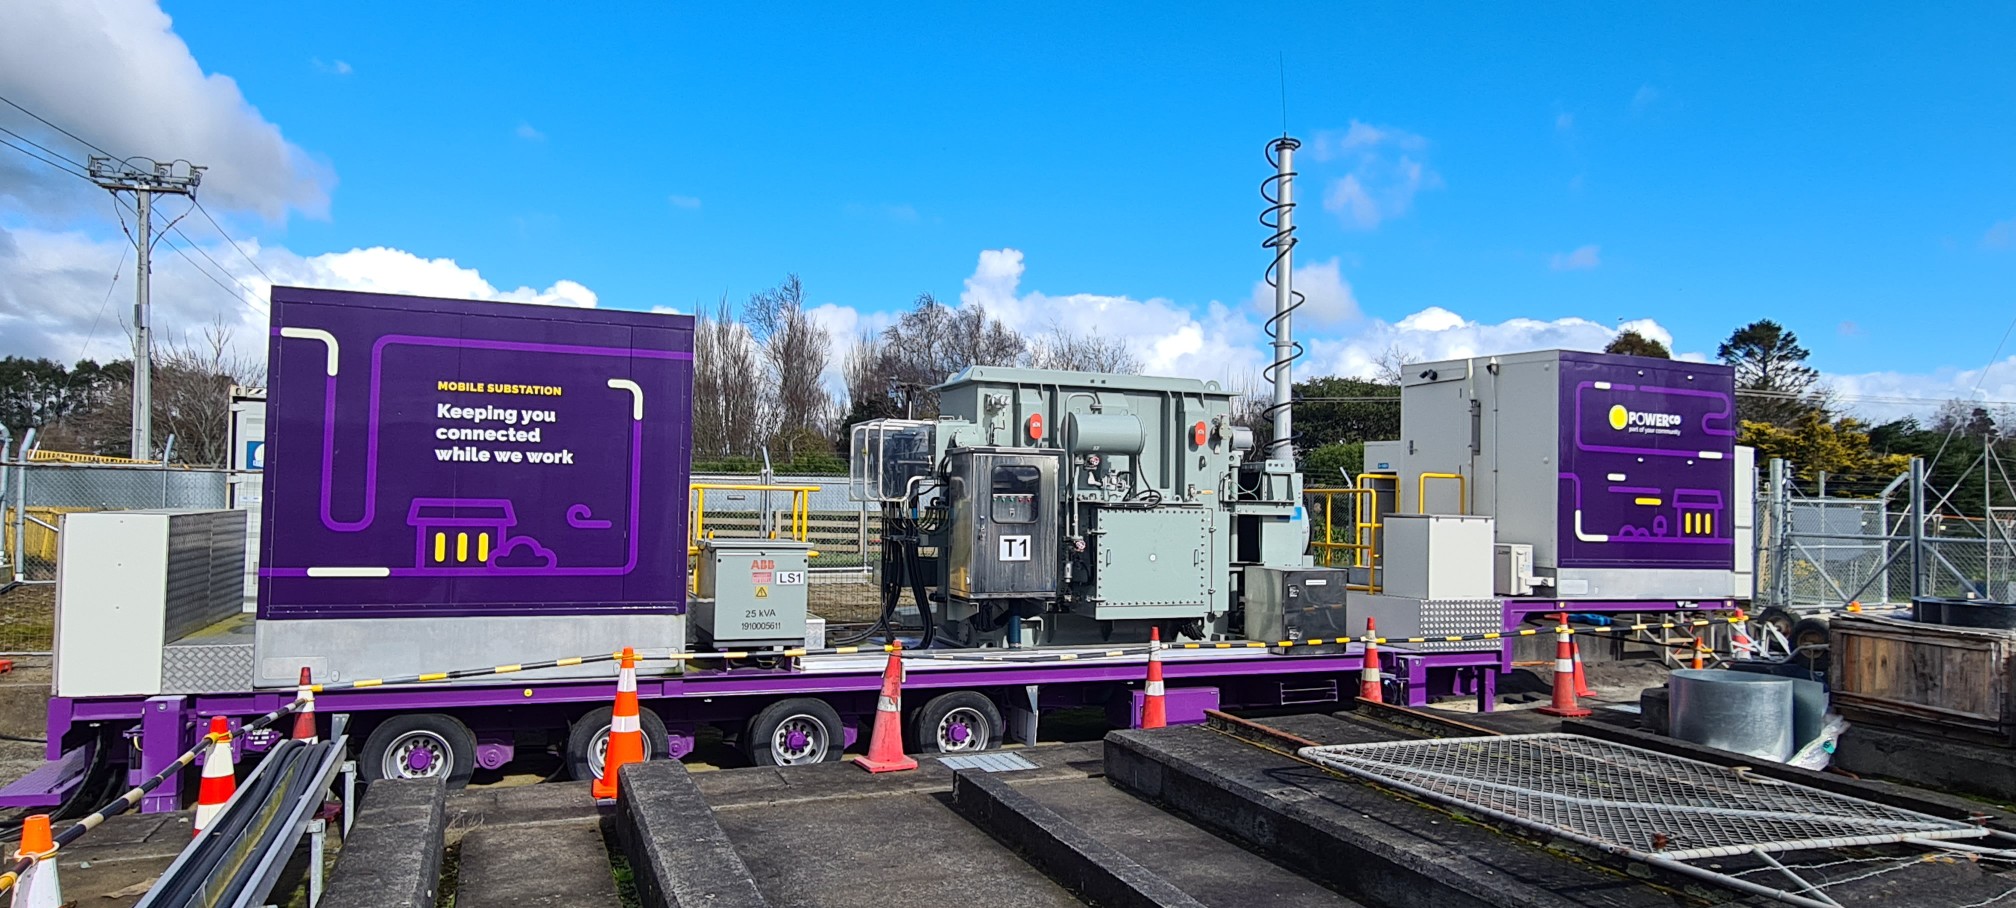 A much smaller version of an electricity substation on wheels that can be transported around.